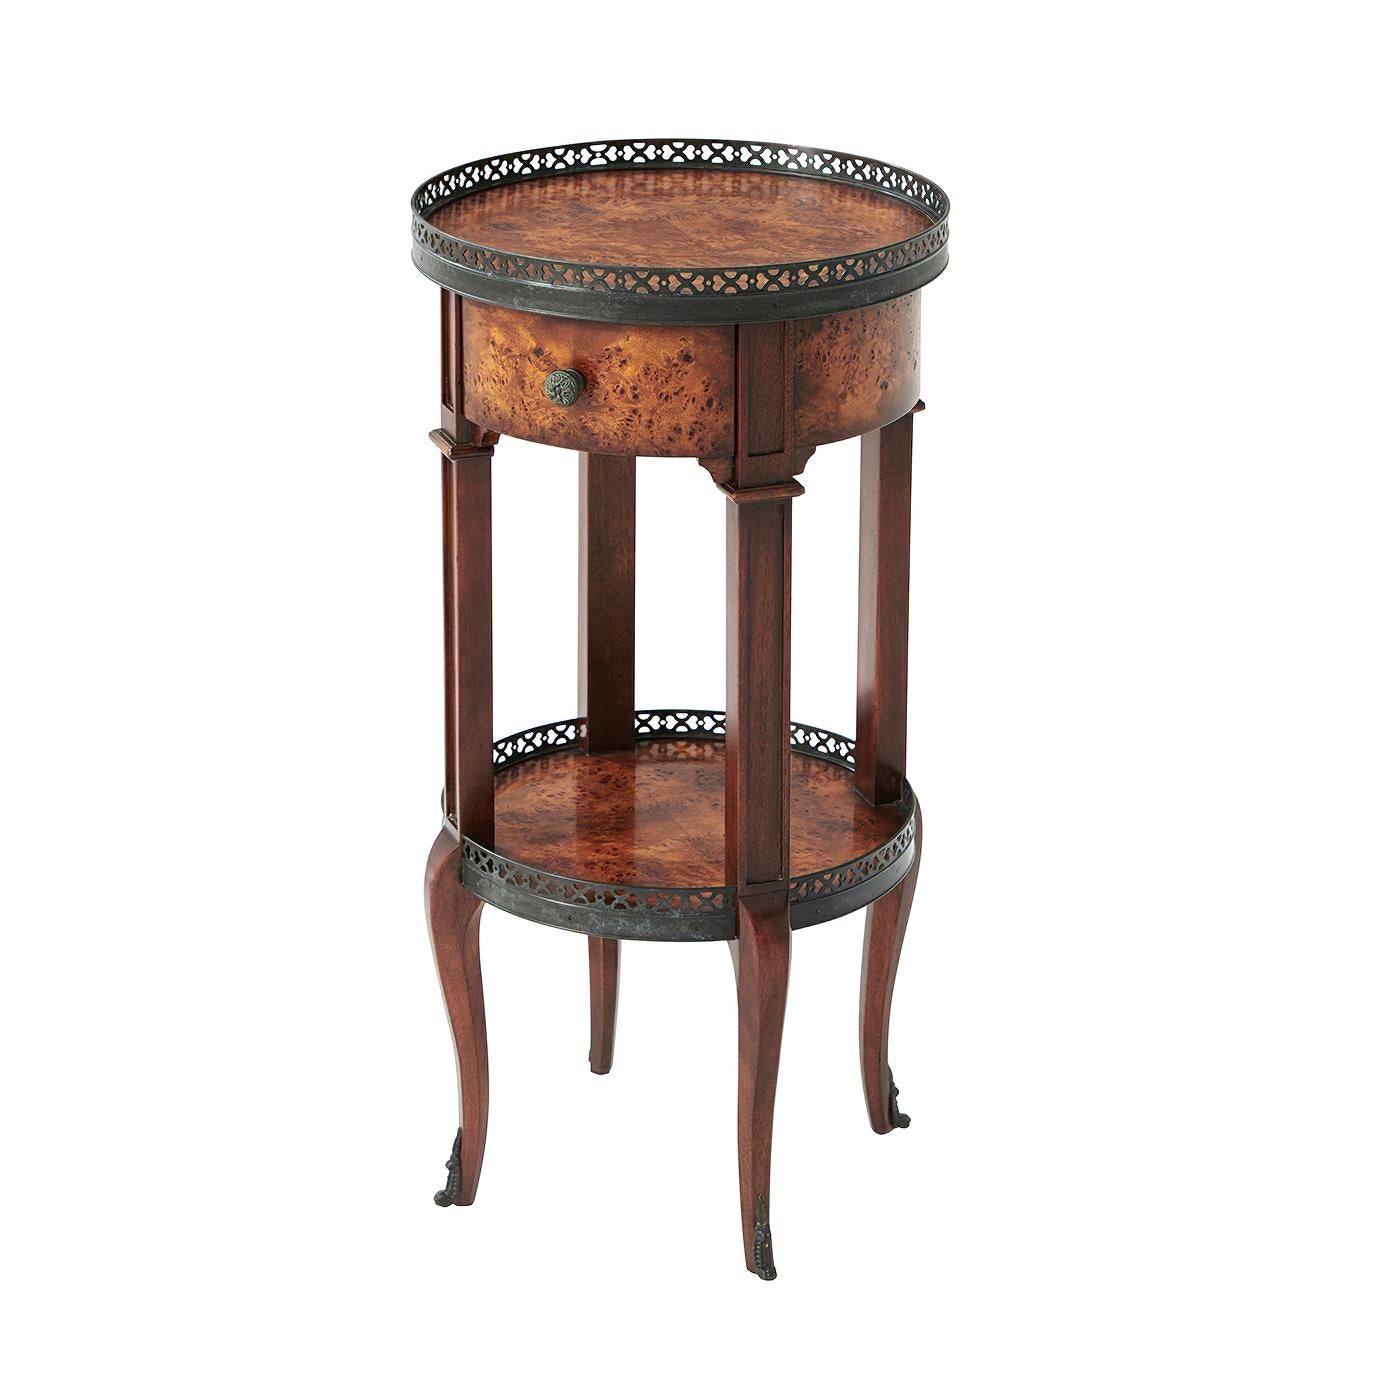 A French Louis XVI style round poplar burl side table, the burl veneer top with a patinated brass pierced gallery and similar under tier above a single bowed burl frieze drawer, square paneled supports on cabriole legs terminating in brass sabots.